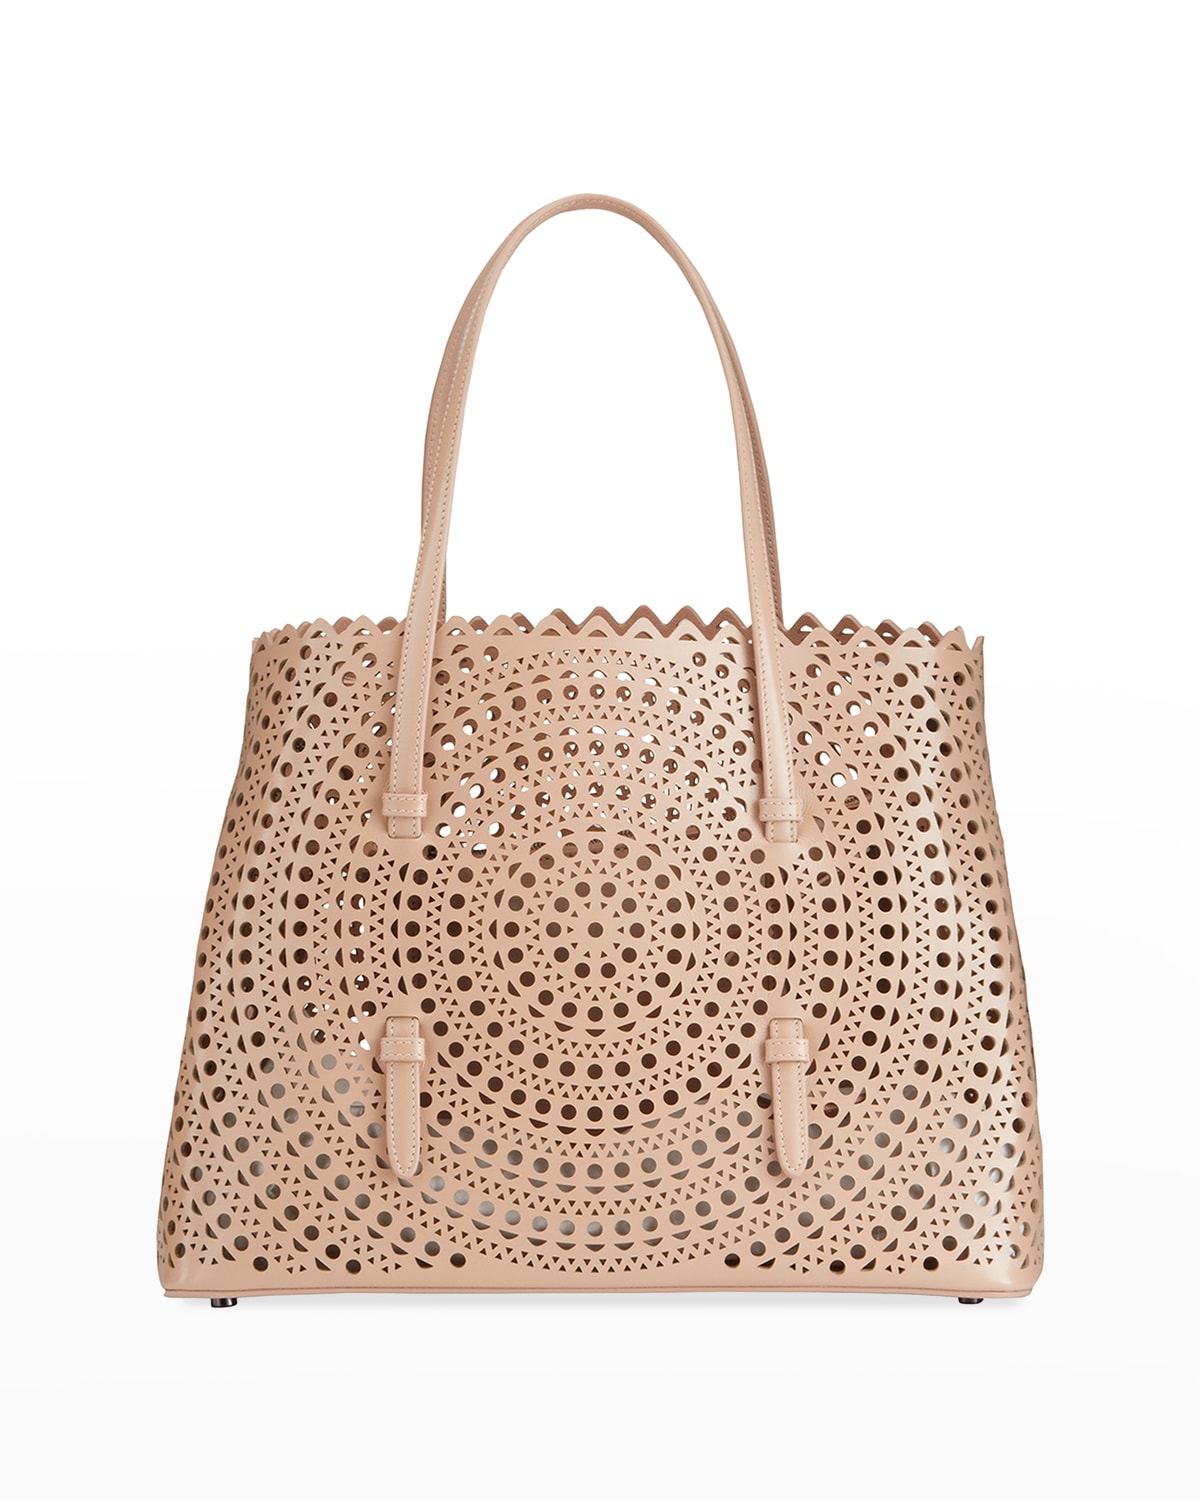 Mina 32 Tote Bag in Vienne Perforated Leather